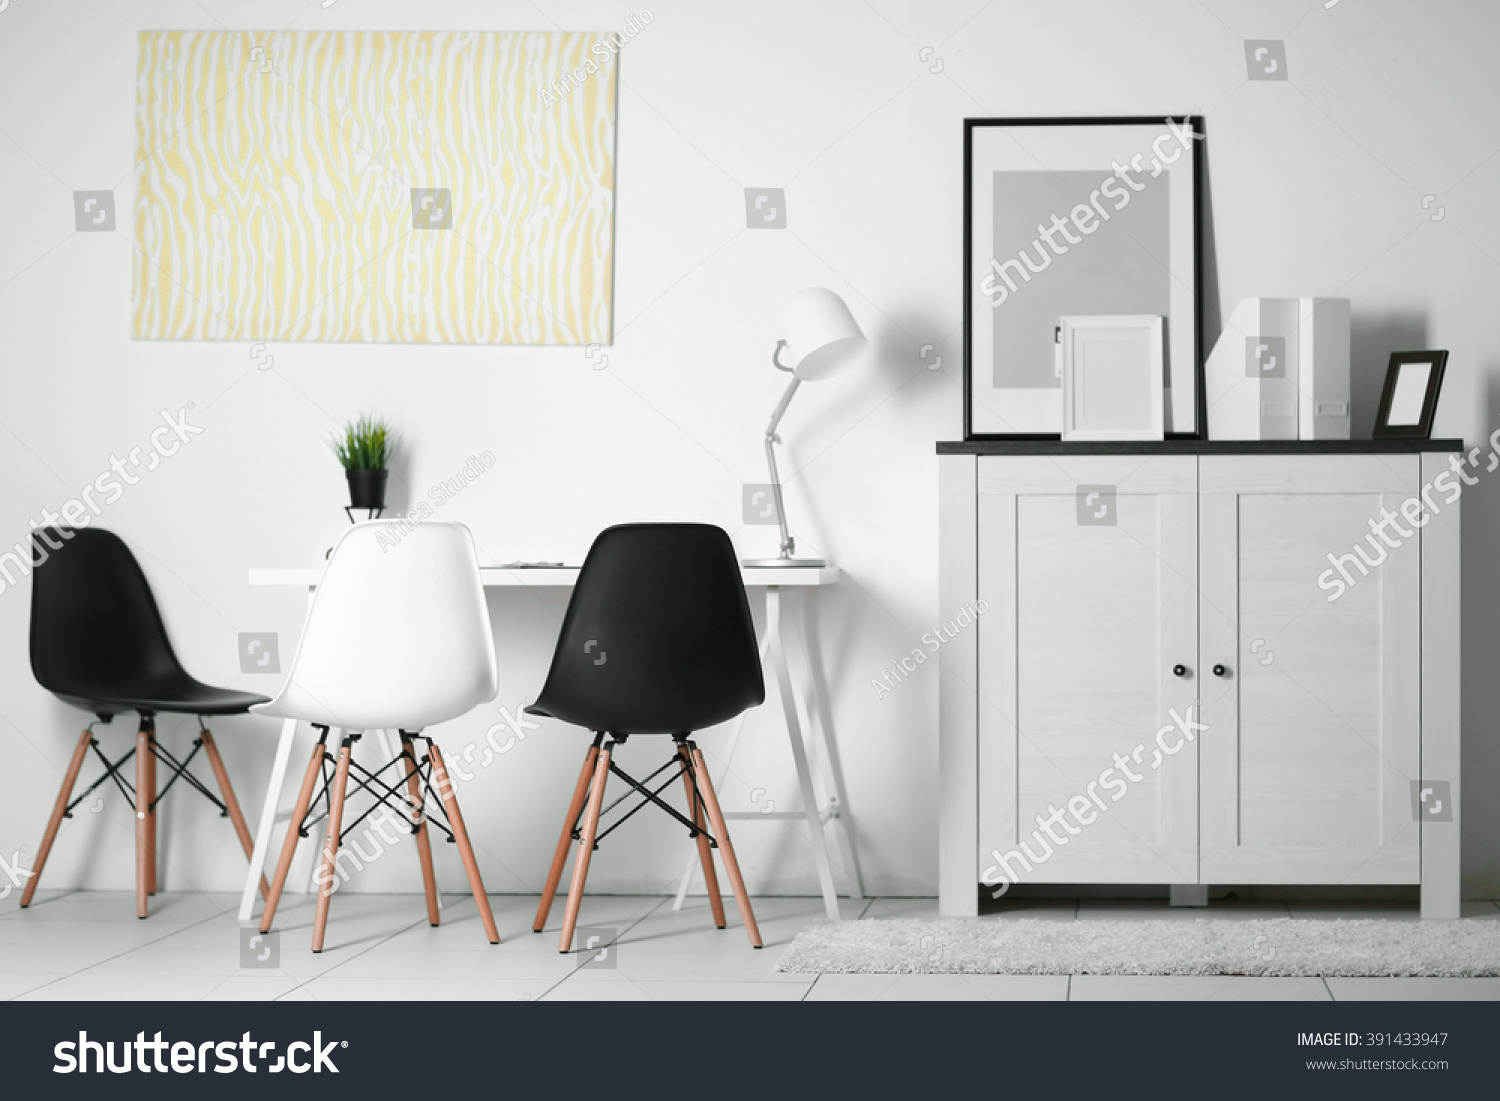 Room Interior Commode Frames Chairs Table Stockfoto Jetzt